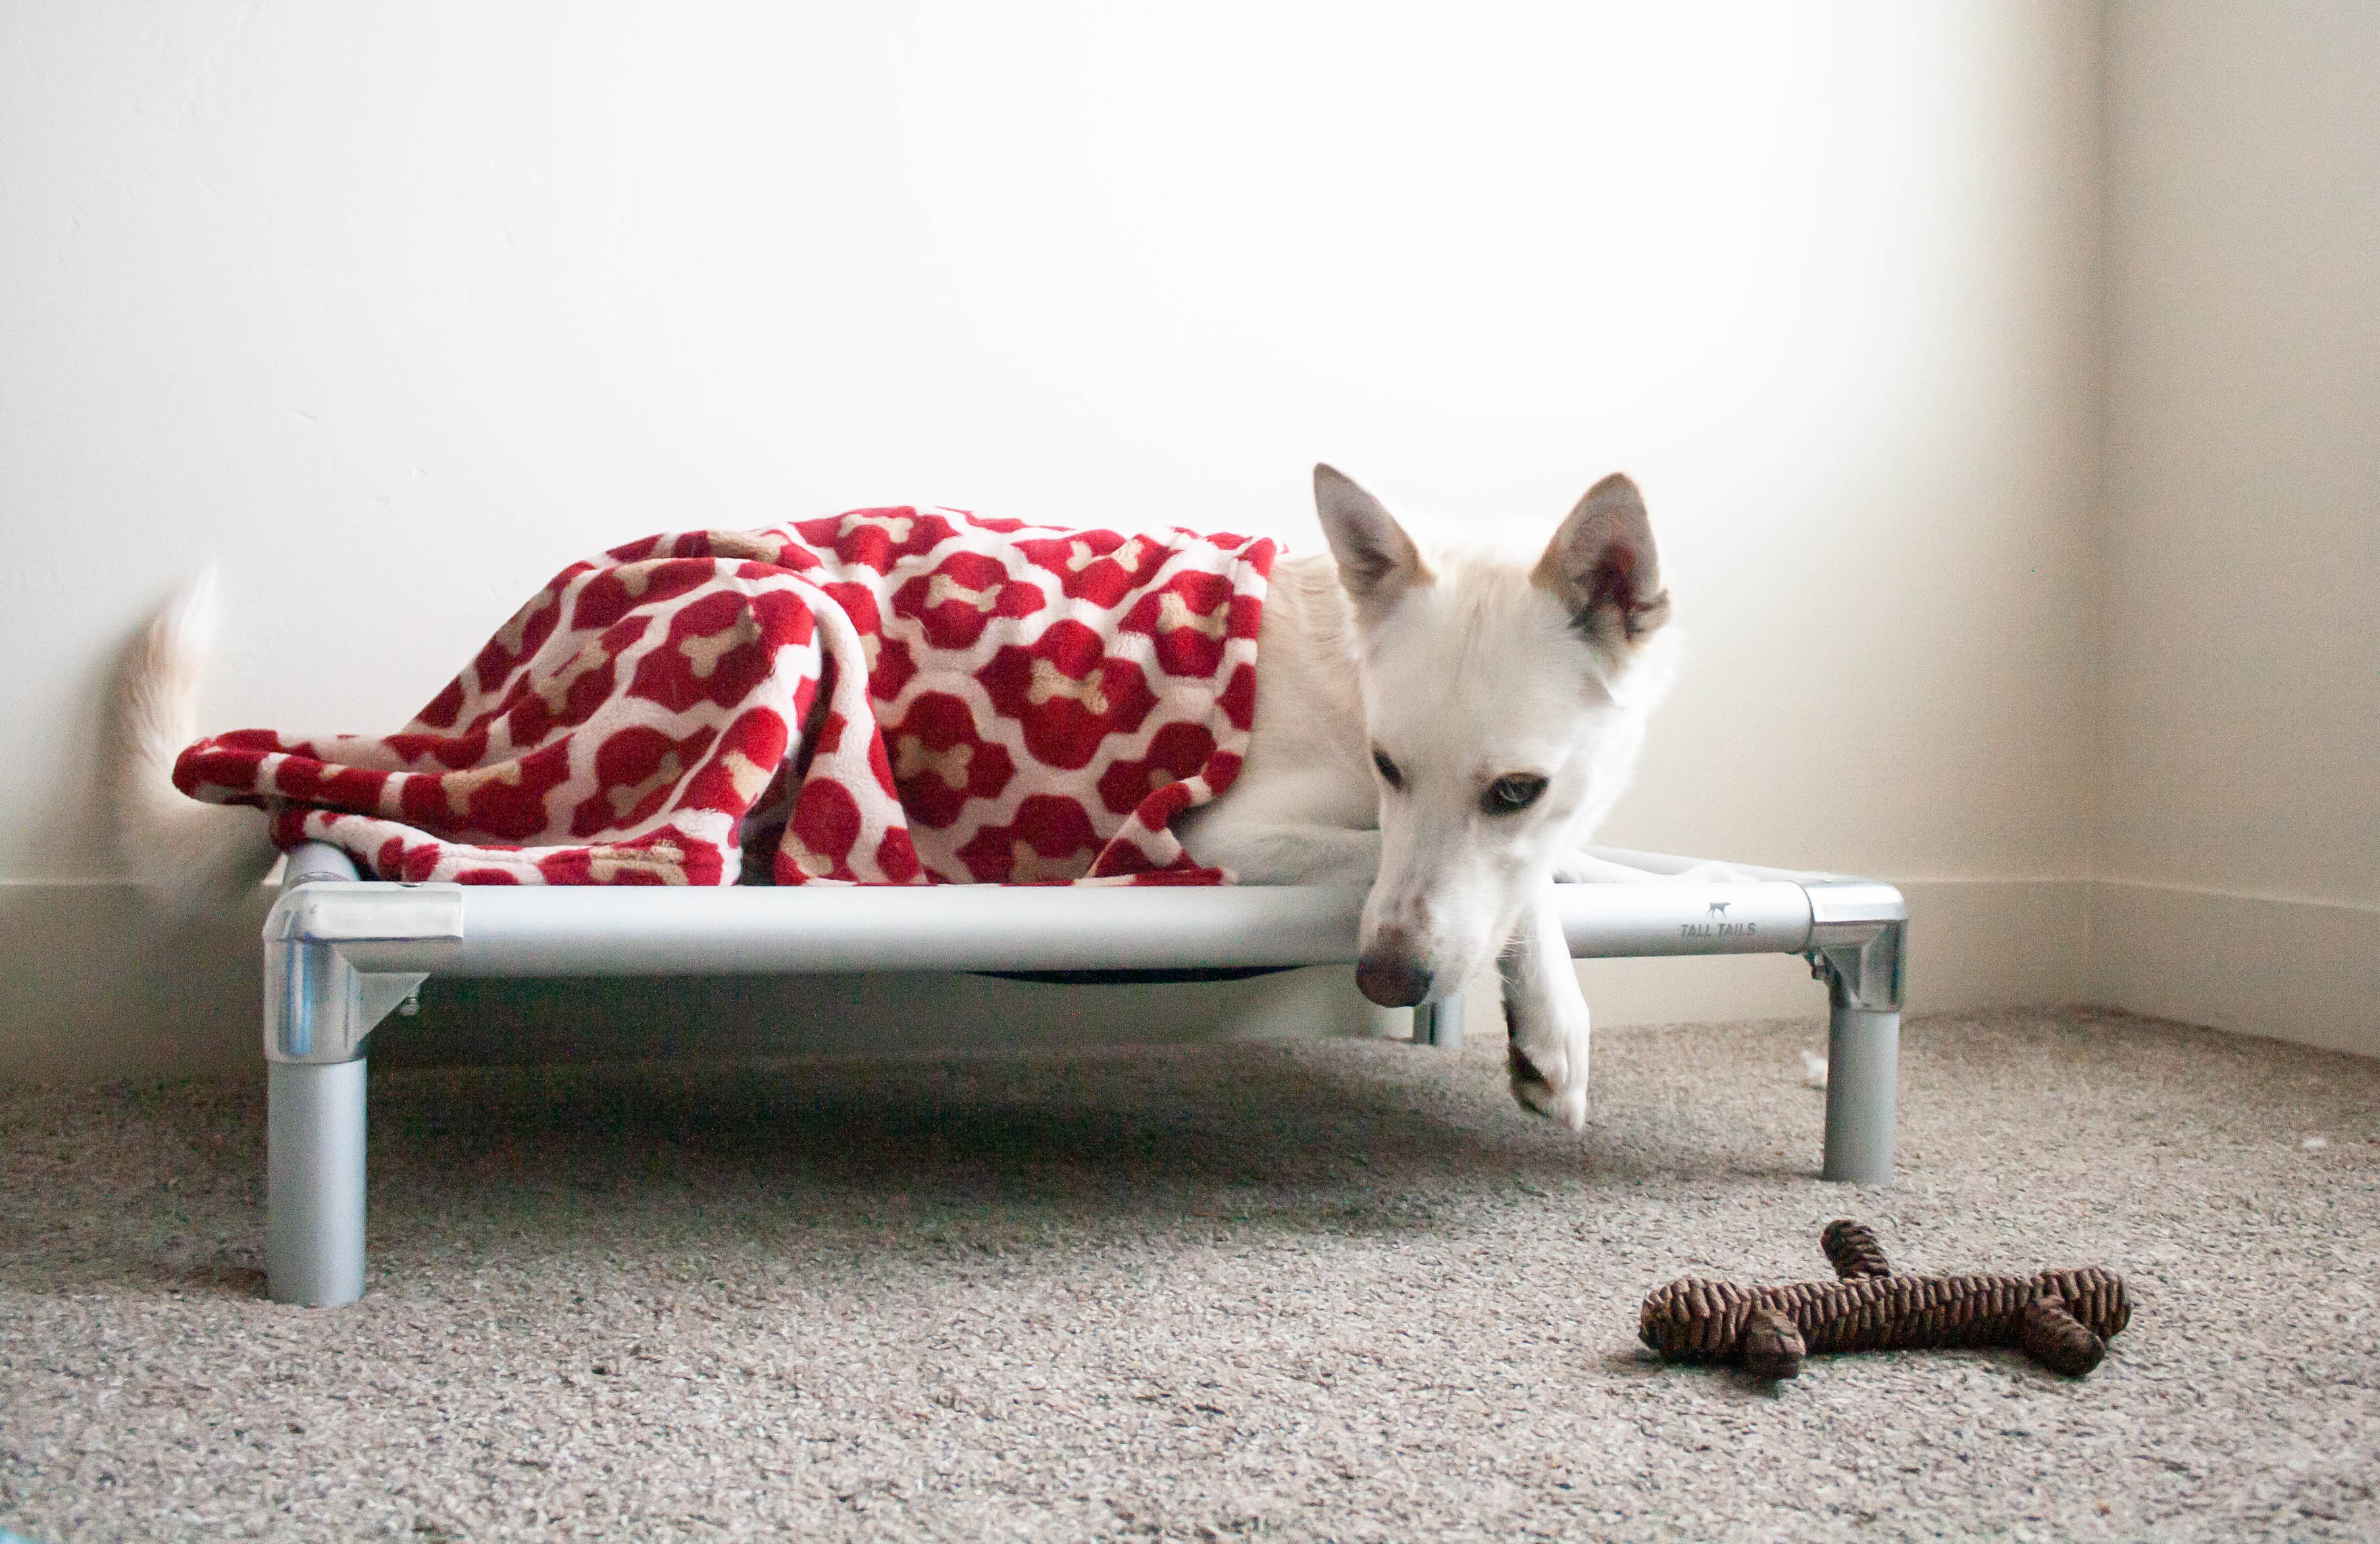 K9 COT Elevated Dog Bed: Mesh Top